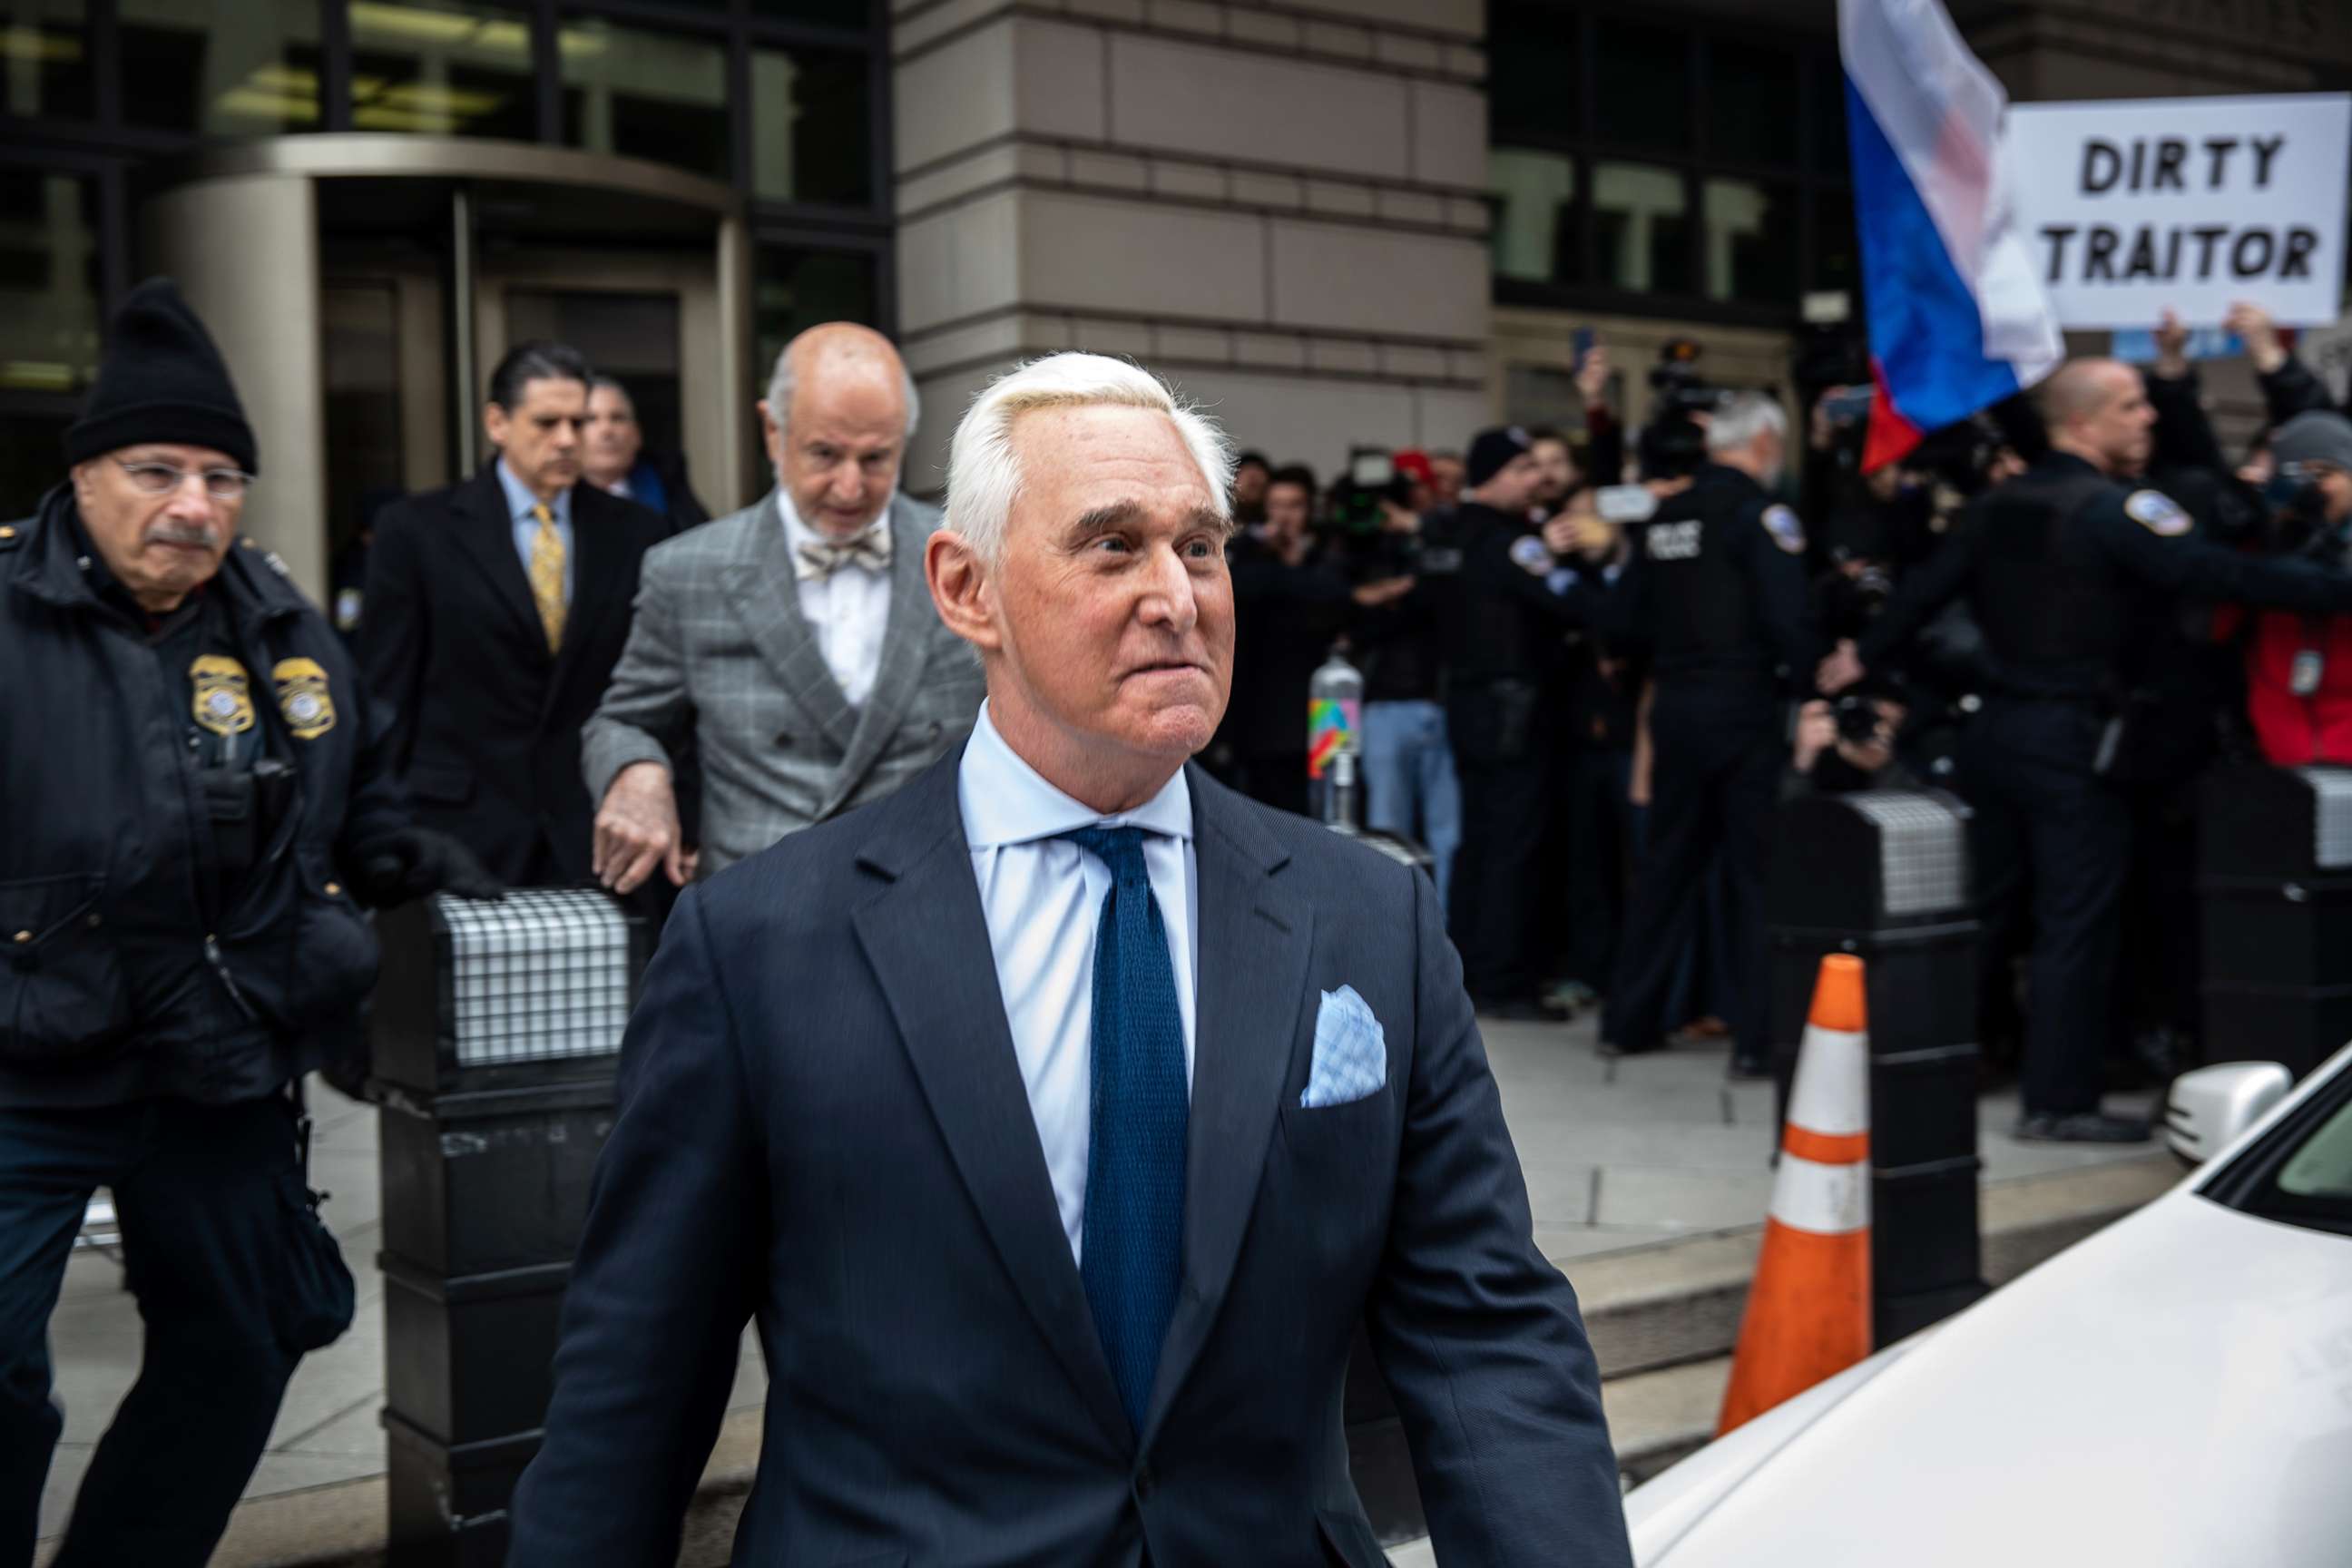 PHOTO: Roger Stone, longtime advisor to President Donald Trump, leaves the U.S. District Courthouse after his arraignment in Washington, D.C., Jan. 29, 2019.